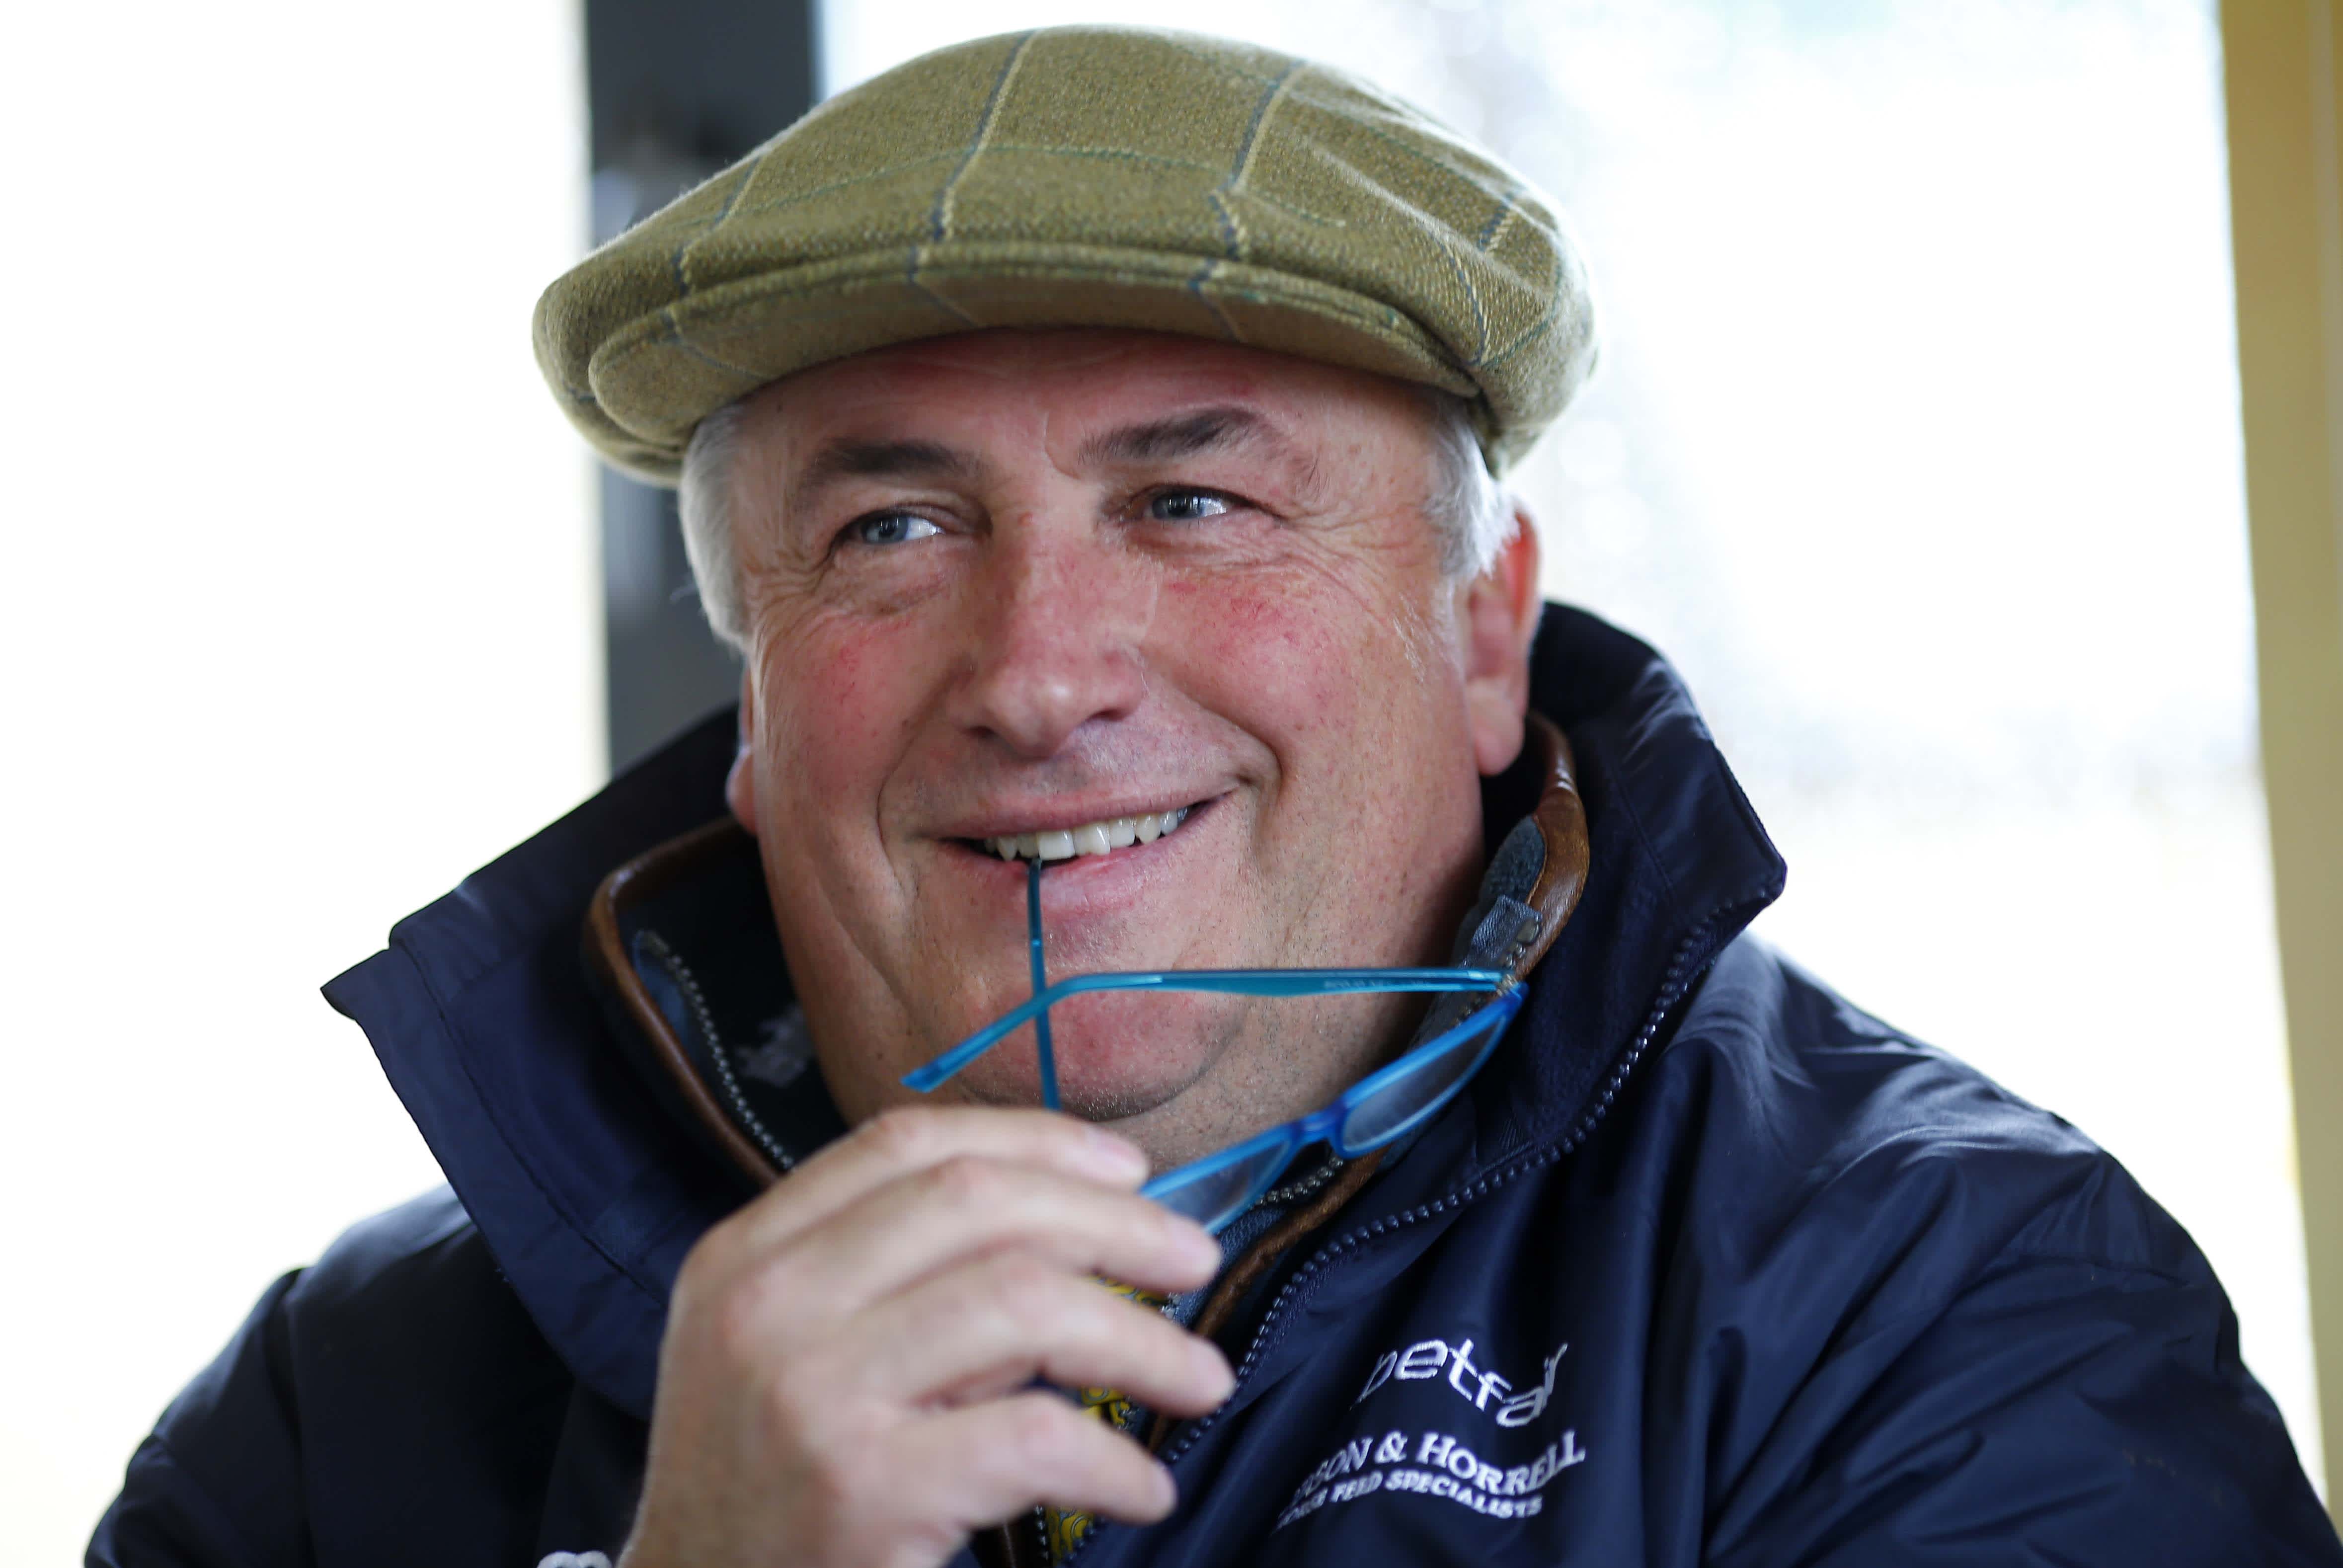 "One of the best chances we have" - Paul Nicholls with the ...